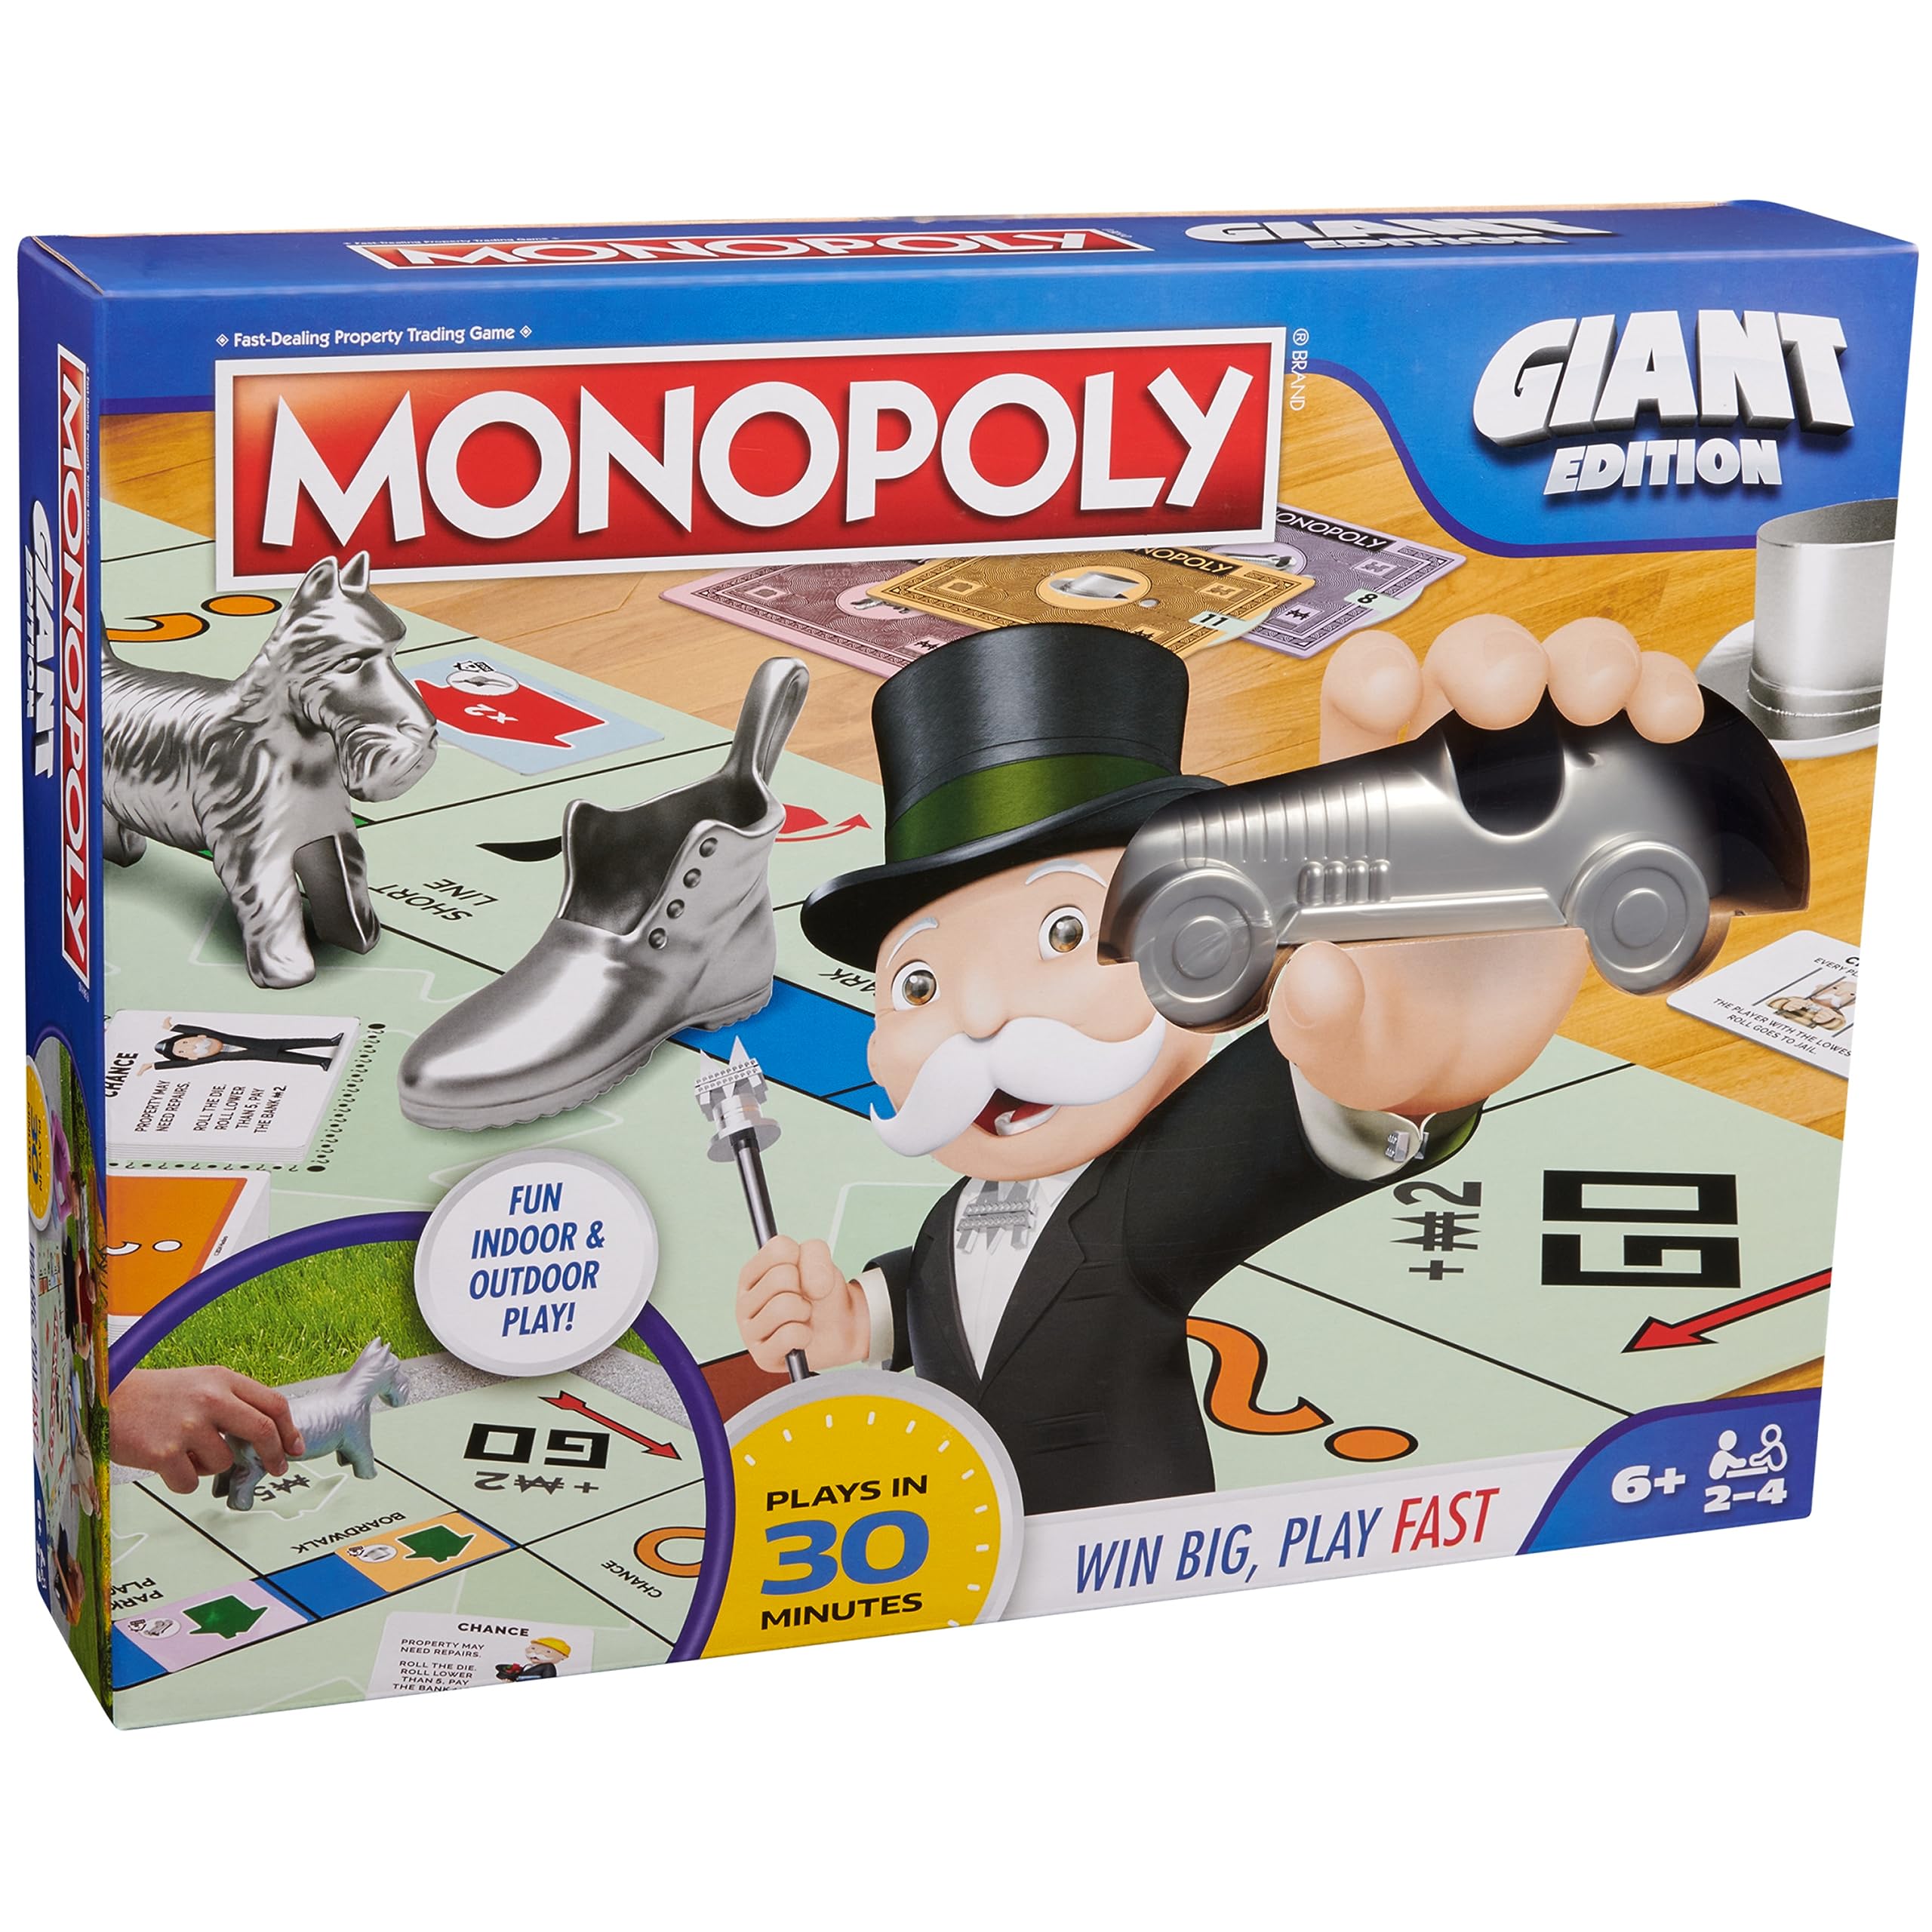 Monopoly Board Game Giant Edition Game for Kids | Family Board Game | Outdoor Games | Kids Games with Massive Board, Cards, Tokens, for Kids Ages 6+